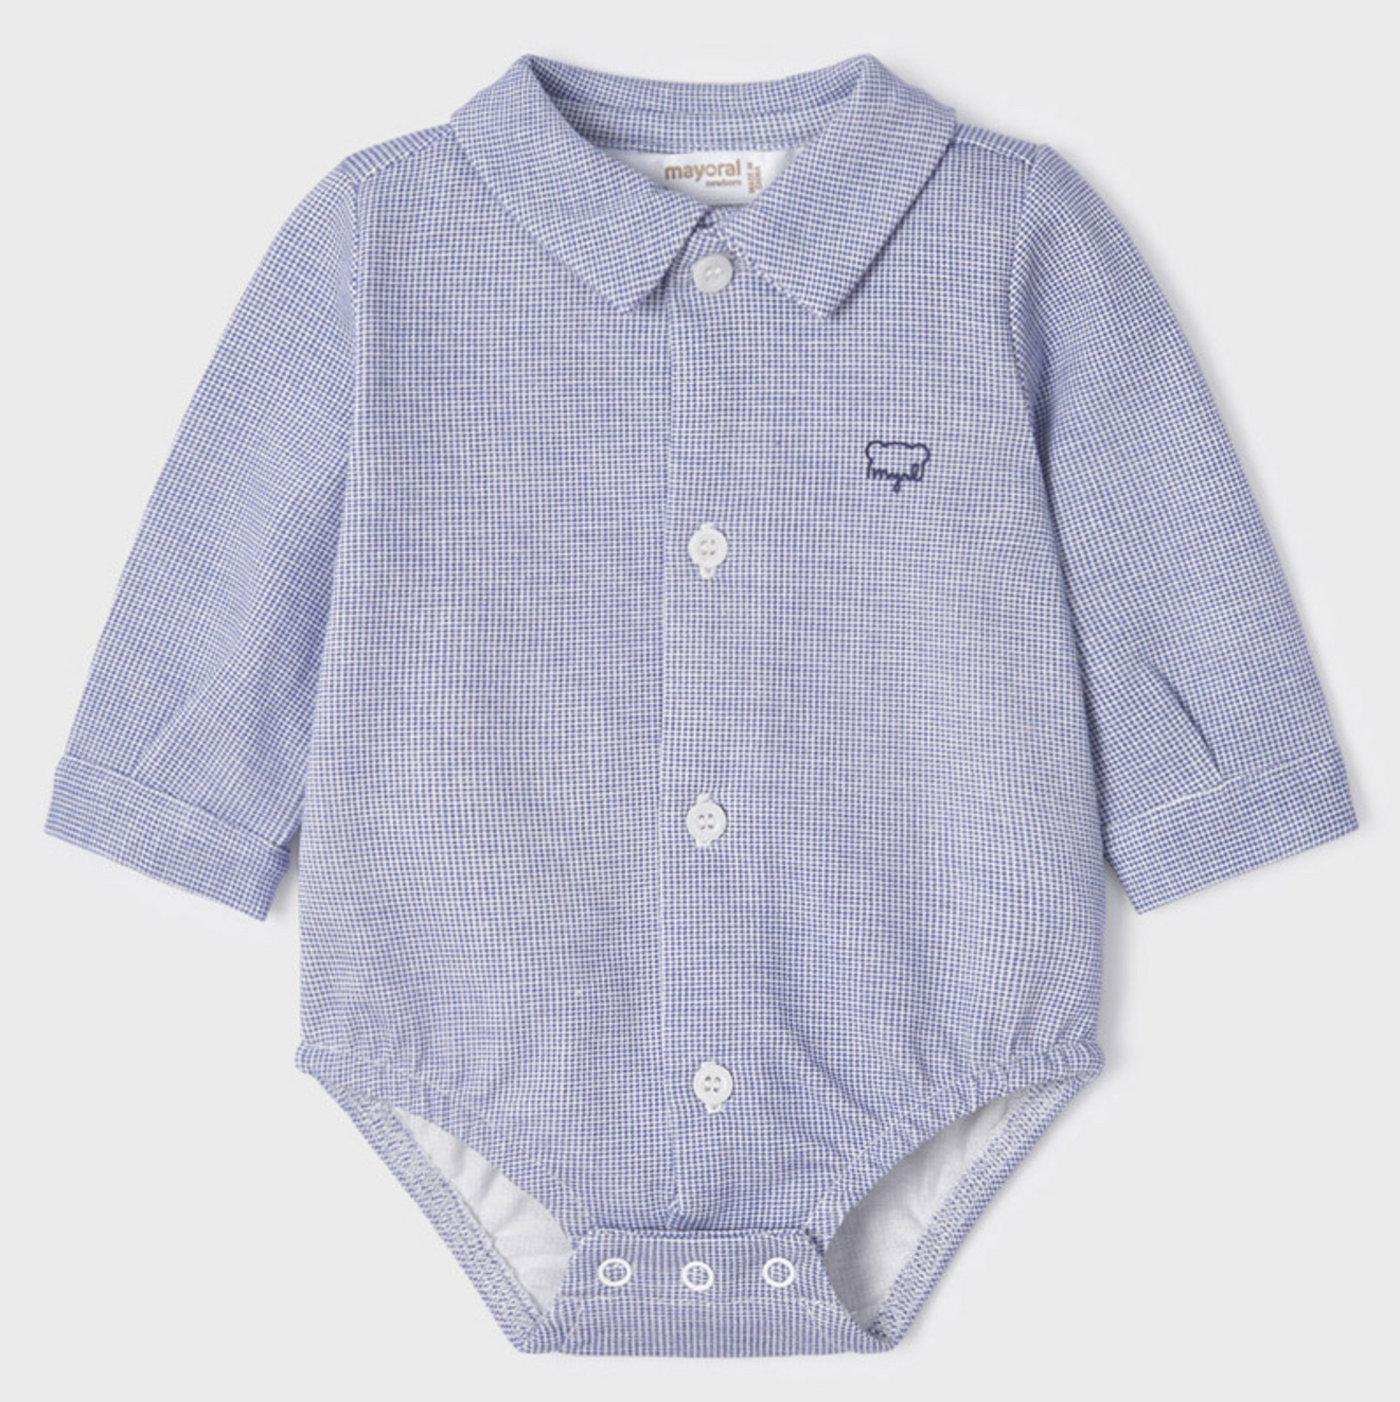 Baby Boy's Long Sleeves Shirt in Light Blue Color